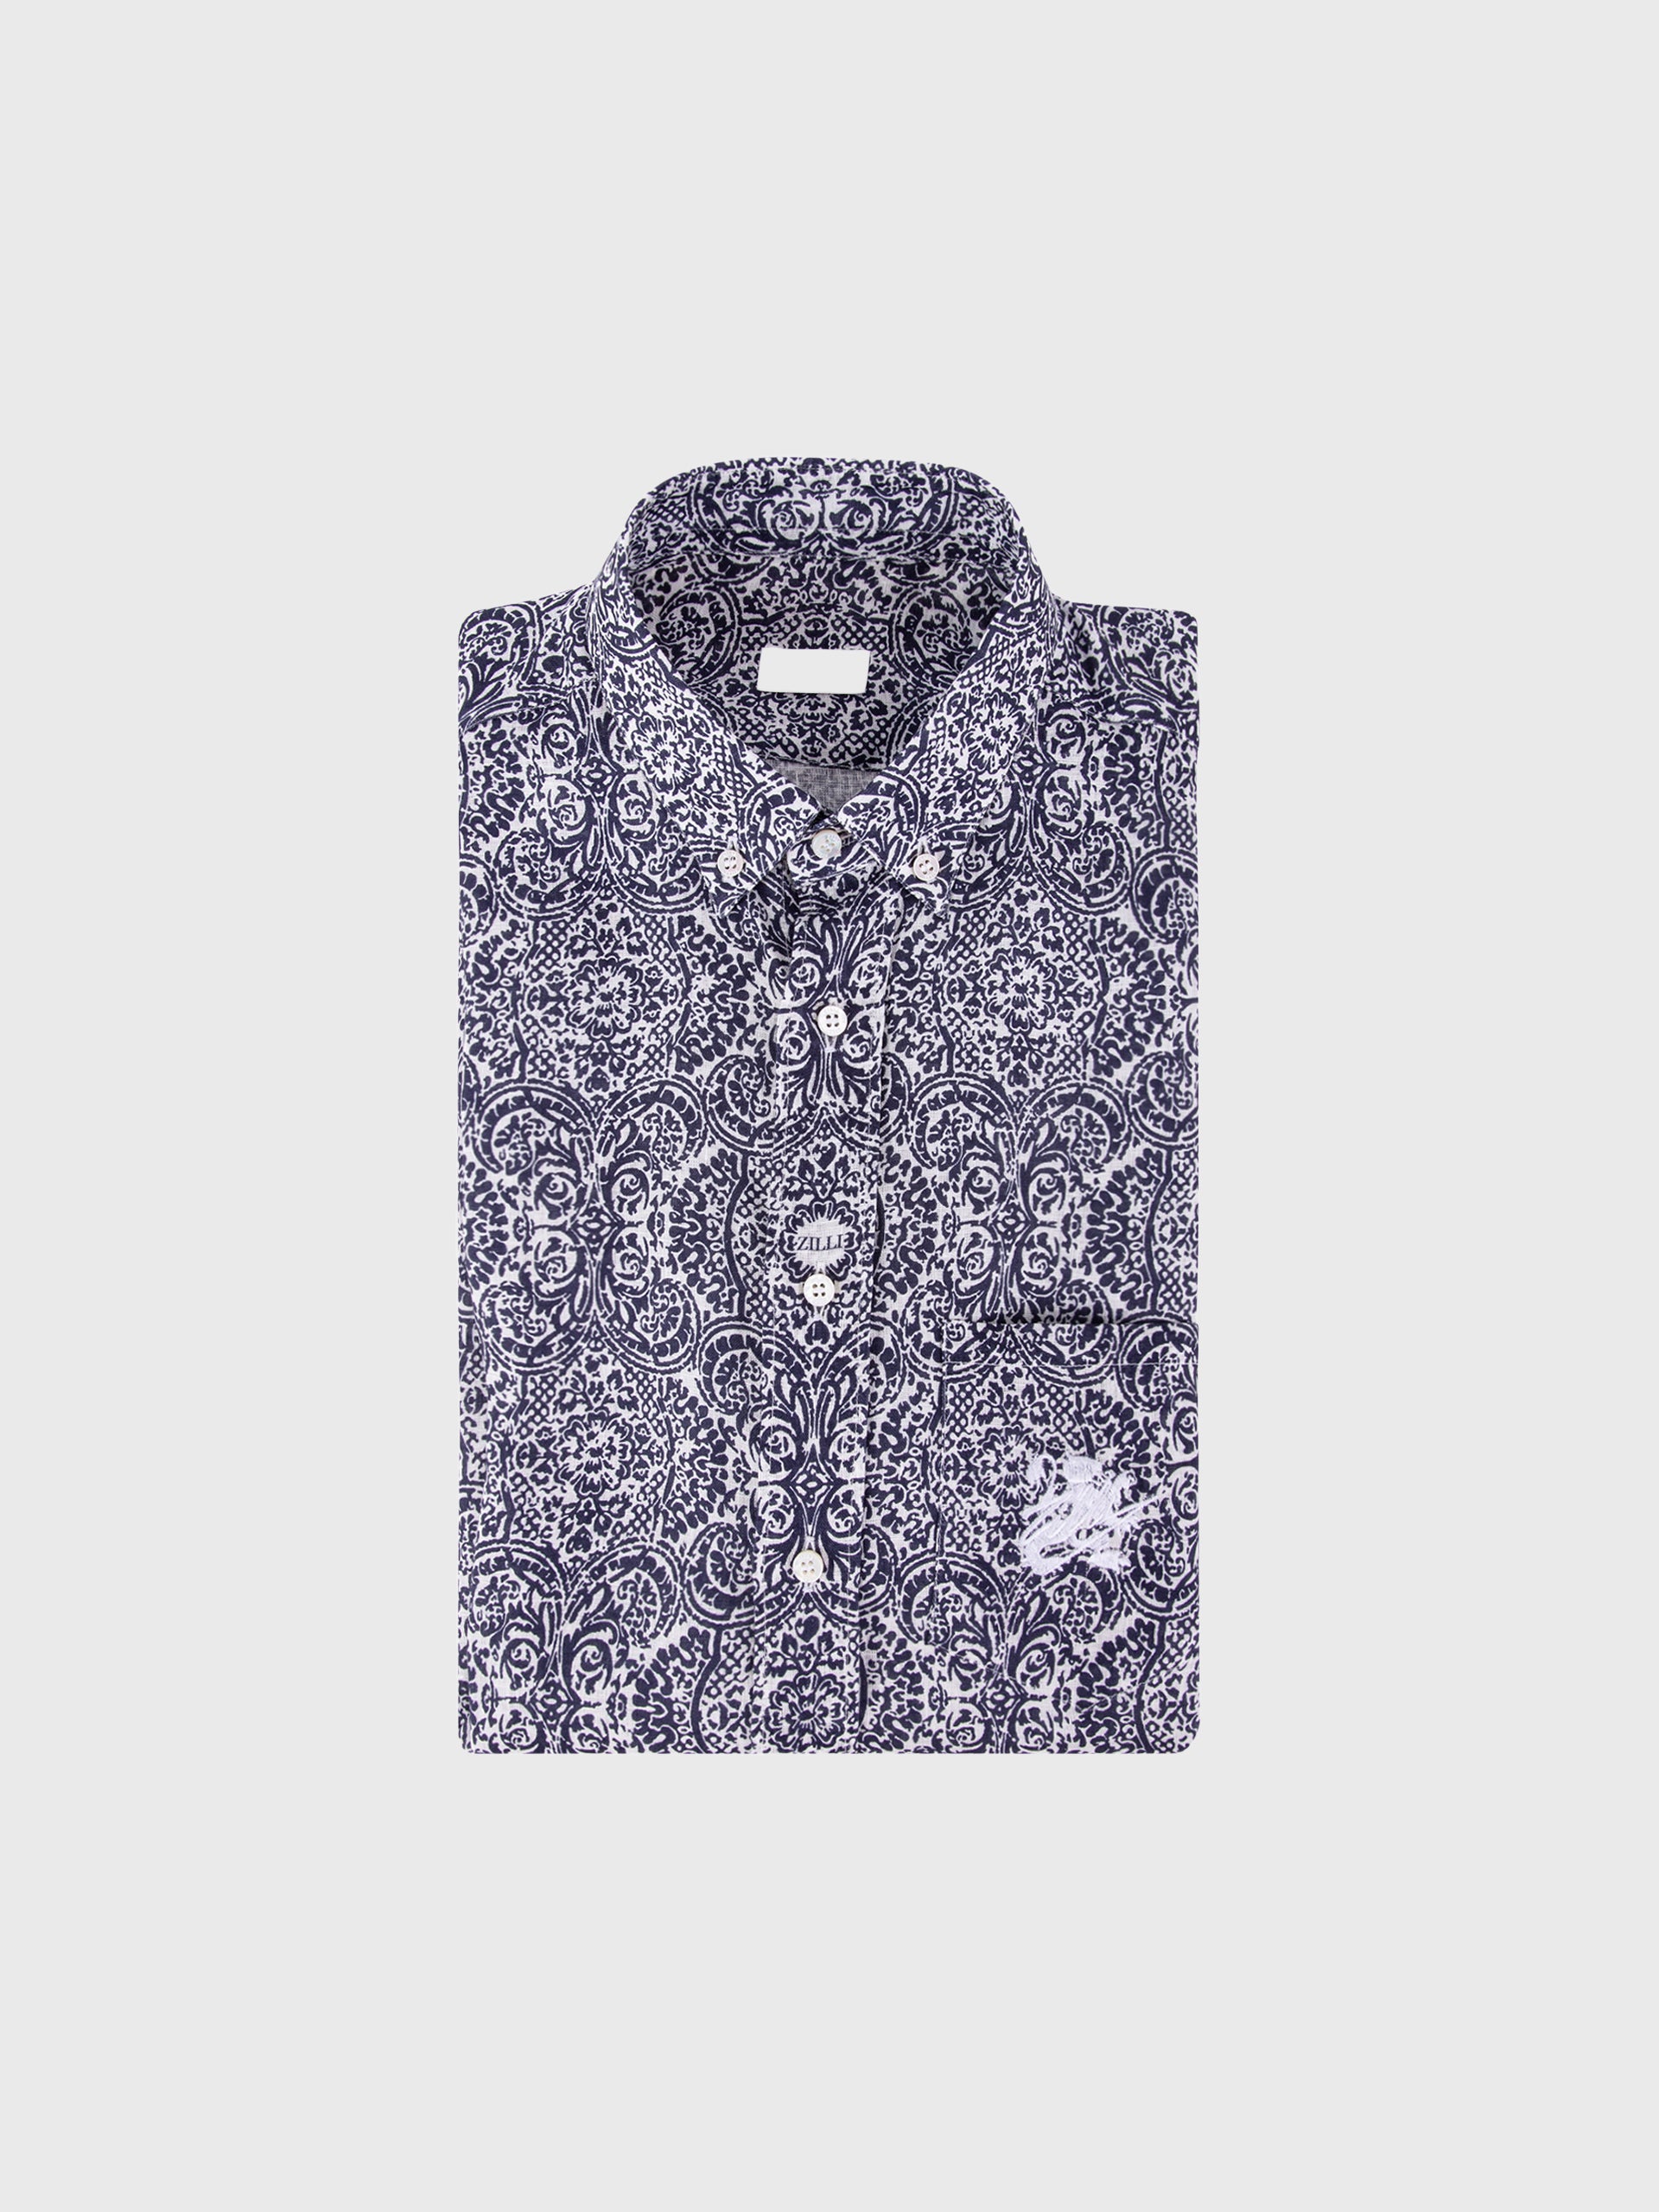 Short Sleeve Shirt with Paisley Printed Pattern